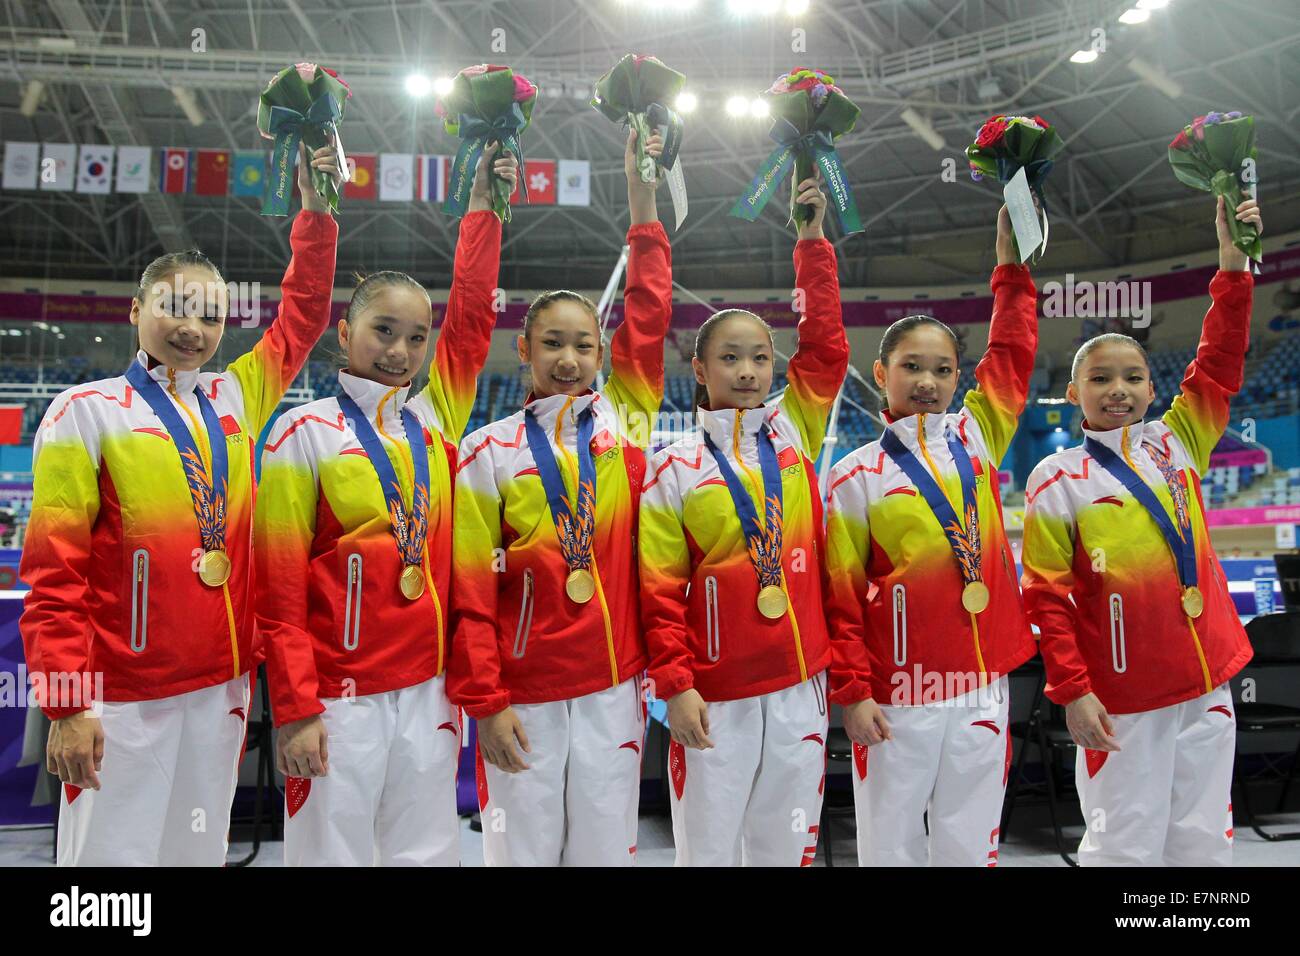 Incheon, South Korea. 22nd Sep, 2014. Chinese athletes Huang Huidan, Yao Jinnan, Bai Yawen, Tan Jiaxin, Chen Siyi and Shang Chunsong (from L to R) pose on the podium during the awarding ceremonoy of women's team contest of gymnastics artistic event at the 17th Asian Games in Incheon, South Korea, Sept. 22, 2014. China won the gold medal with 229.300 points. Credit:  Zheng Huansong/Xinhua/Alamy Live News Stock Photo